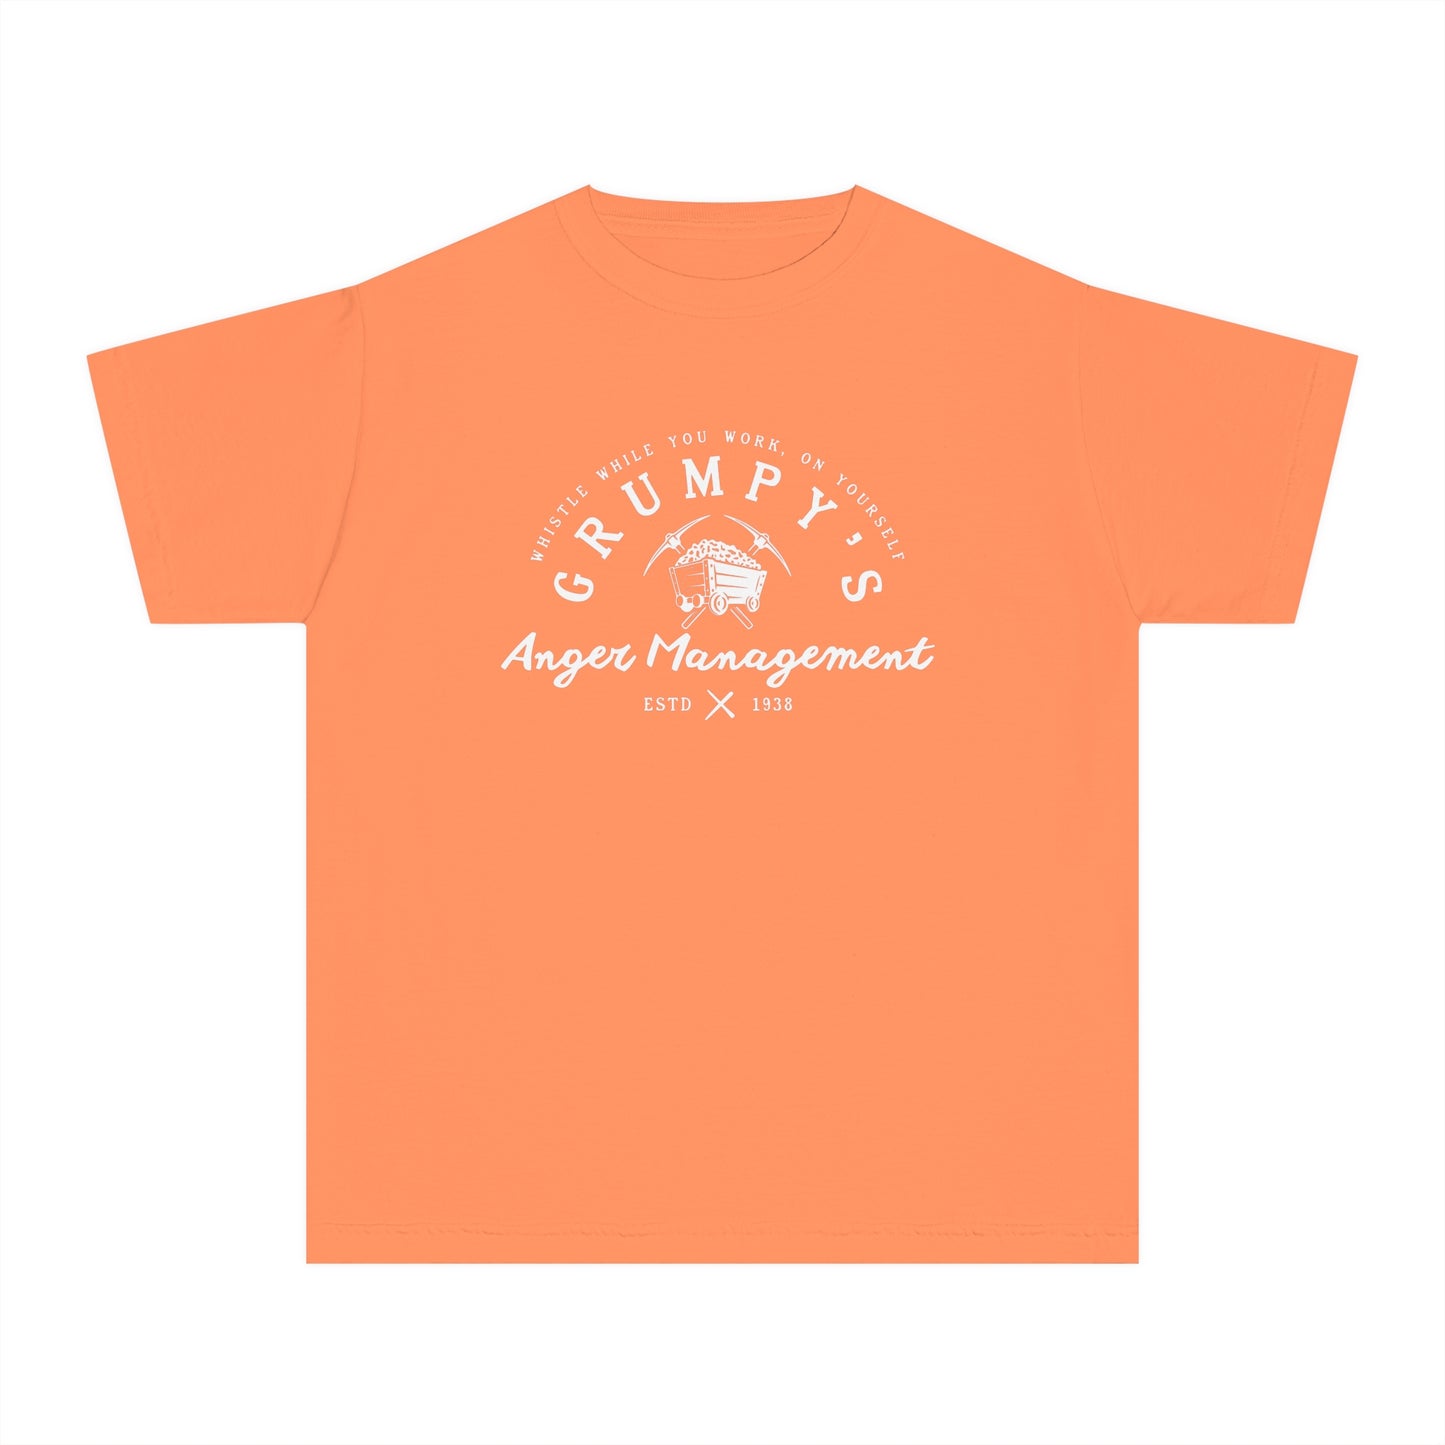 Grumpy’s Anger Management Comfort Colors Youth Midweight Tee